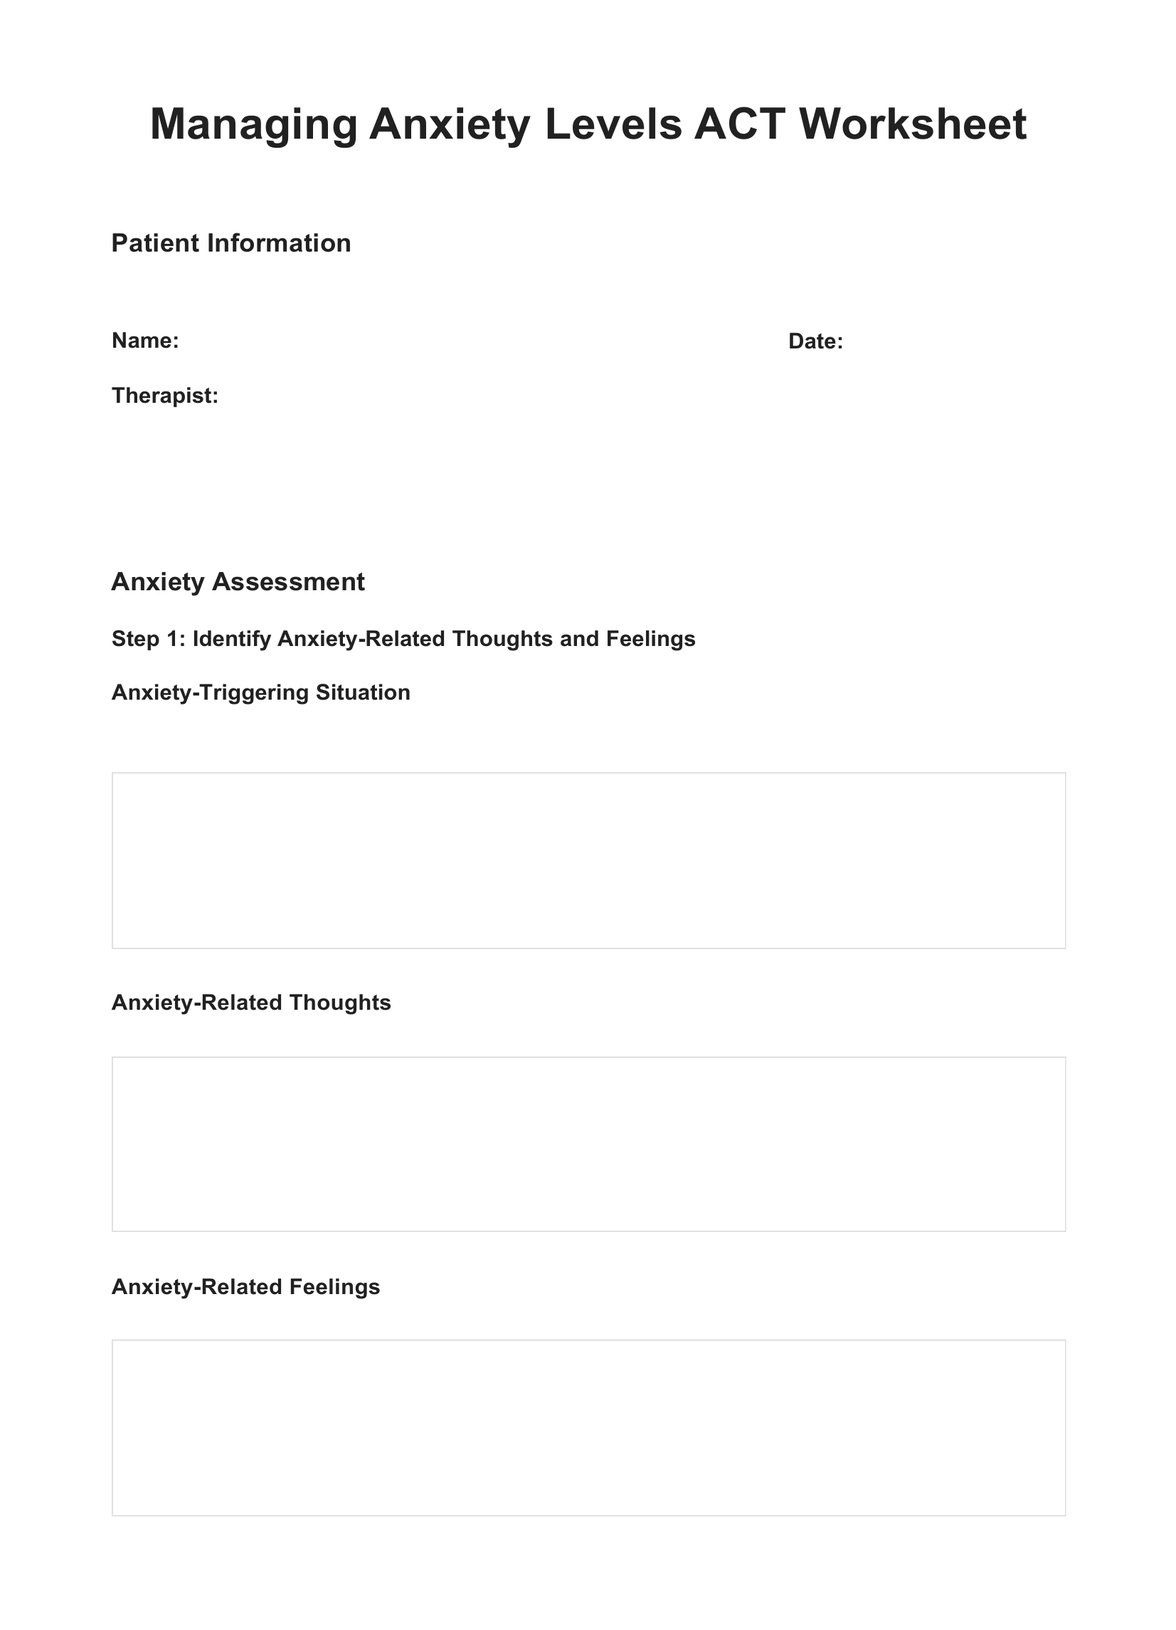 Measuring Anxiety Levels ACT Worksheet PDF Example